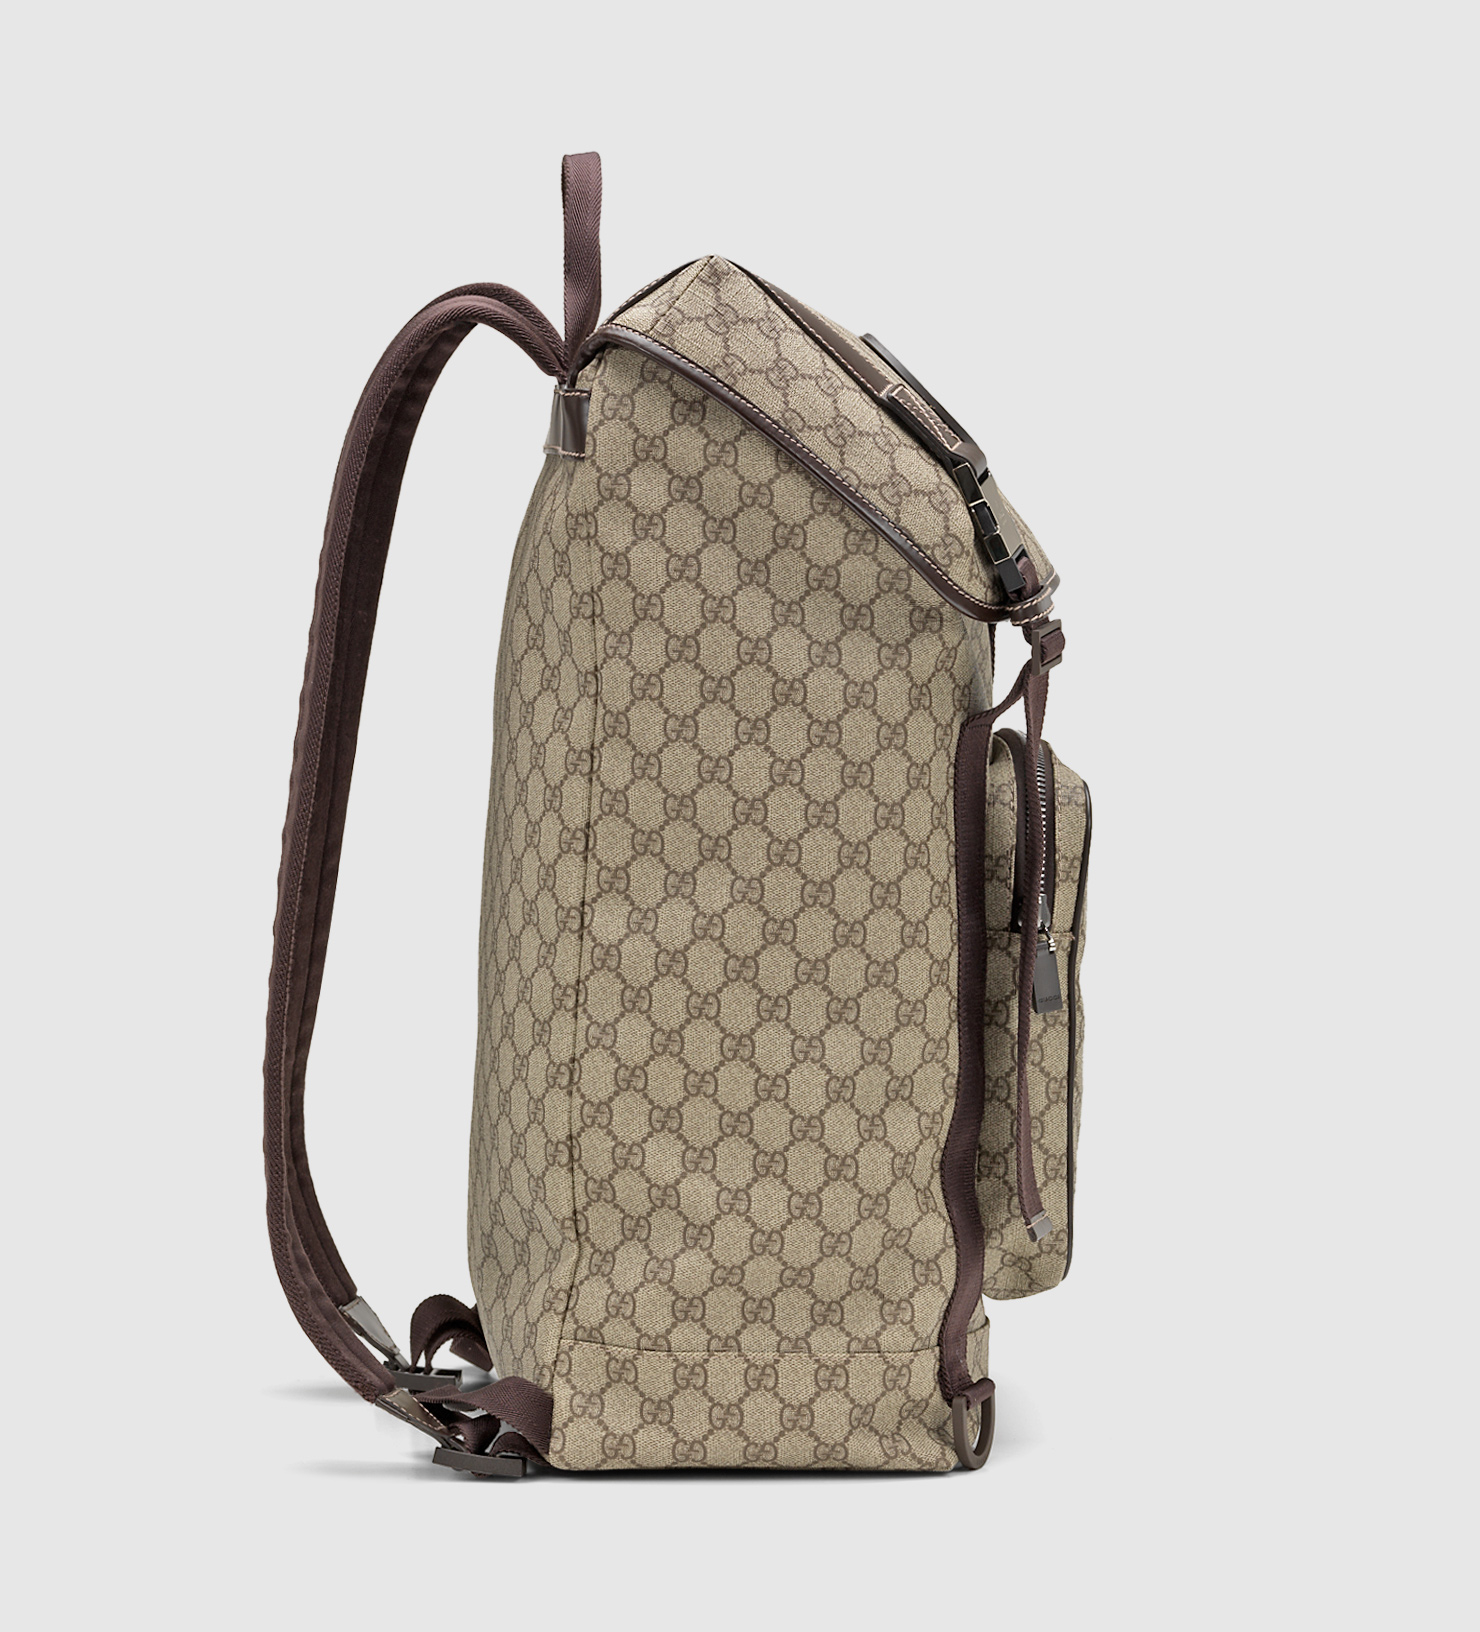 Gucci Men's Gg Canvas Backpack | The Art of Mike Mignola